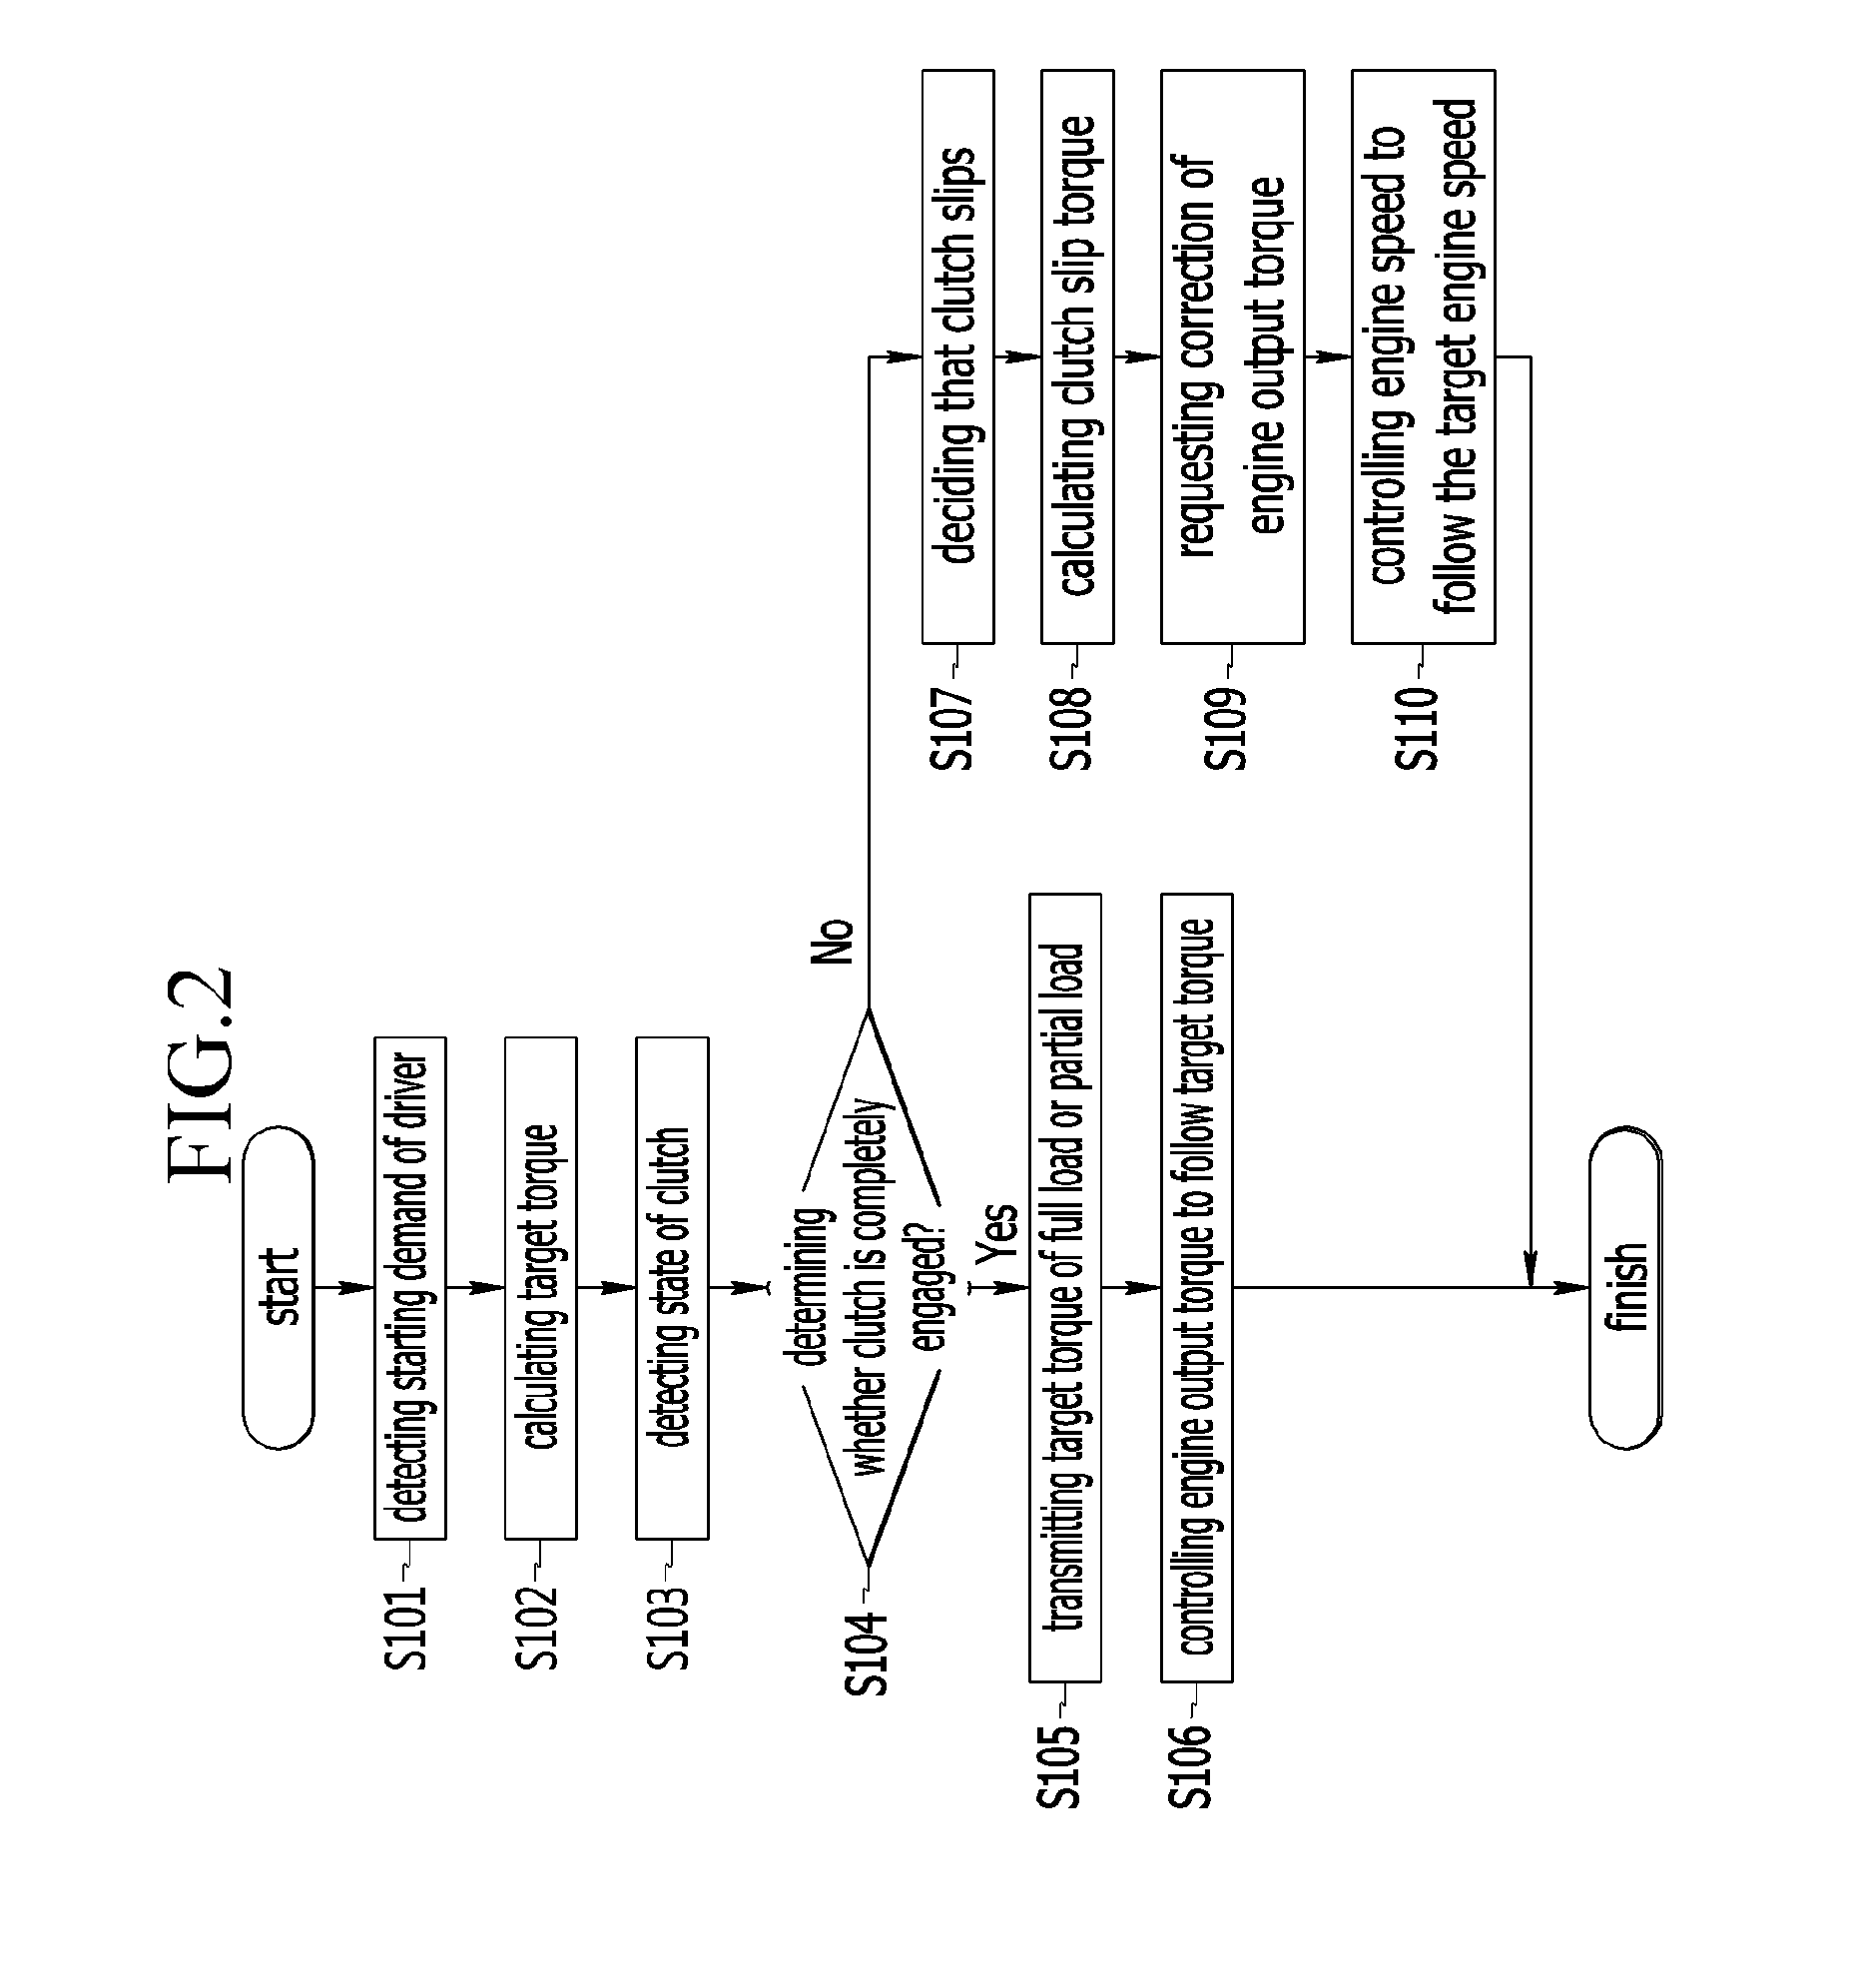 System and method for starting control of hybrid vehicle